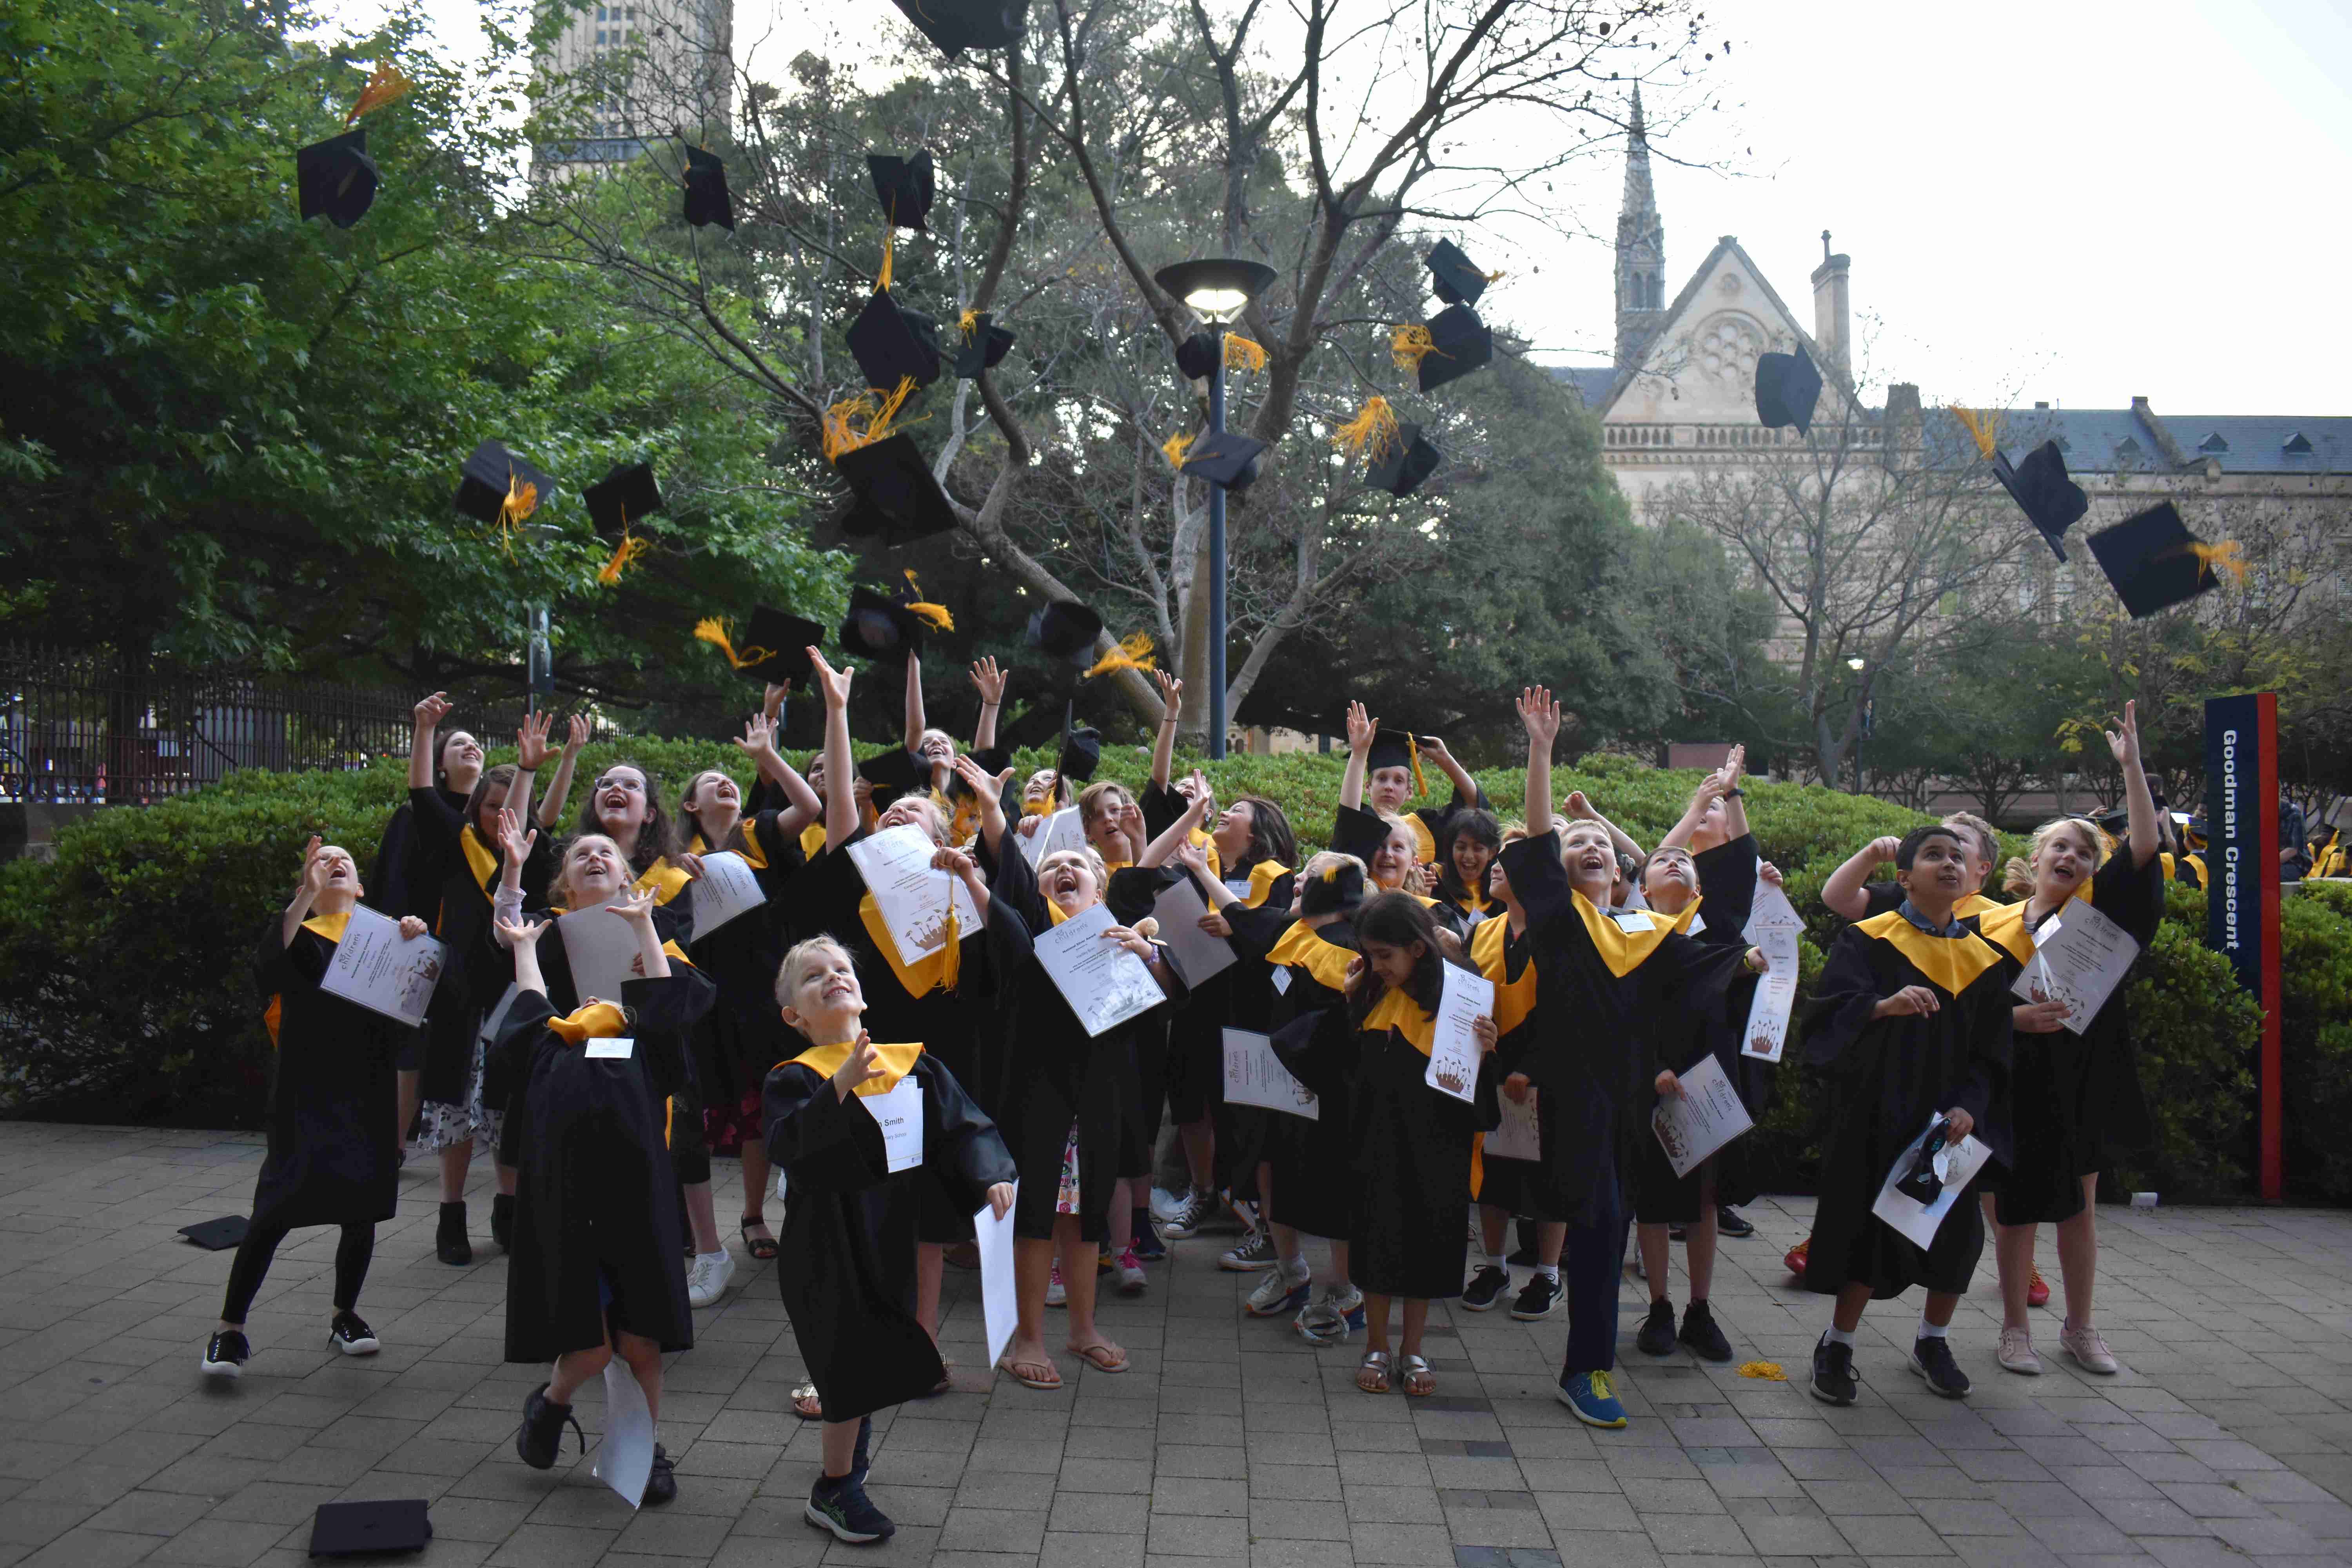 Students throwing hats